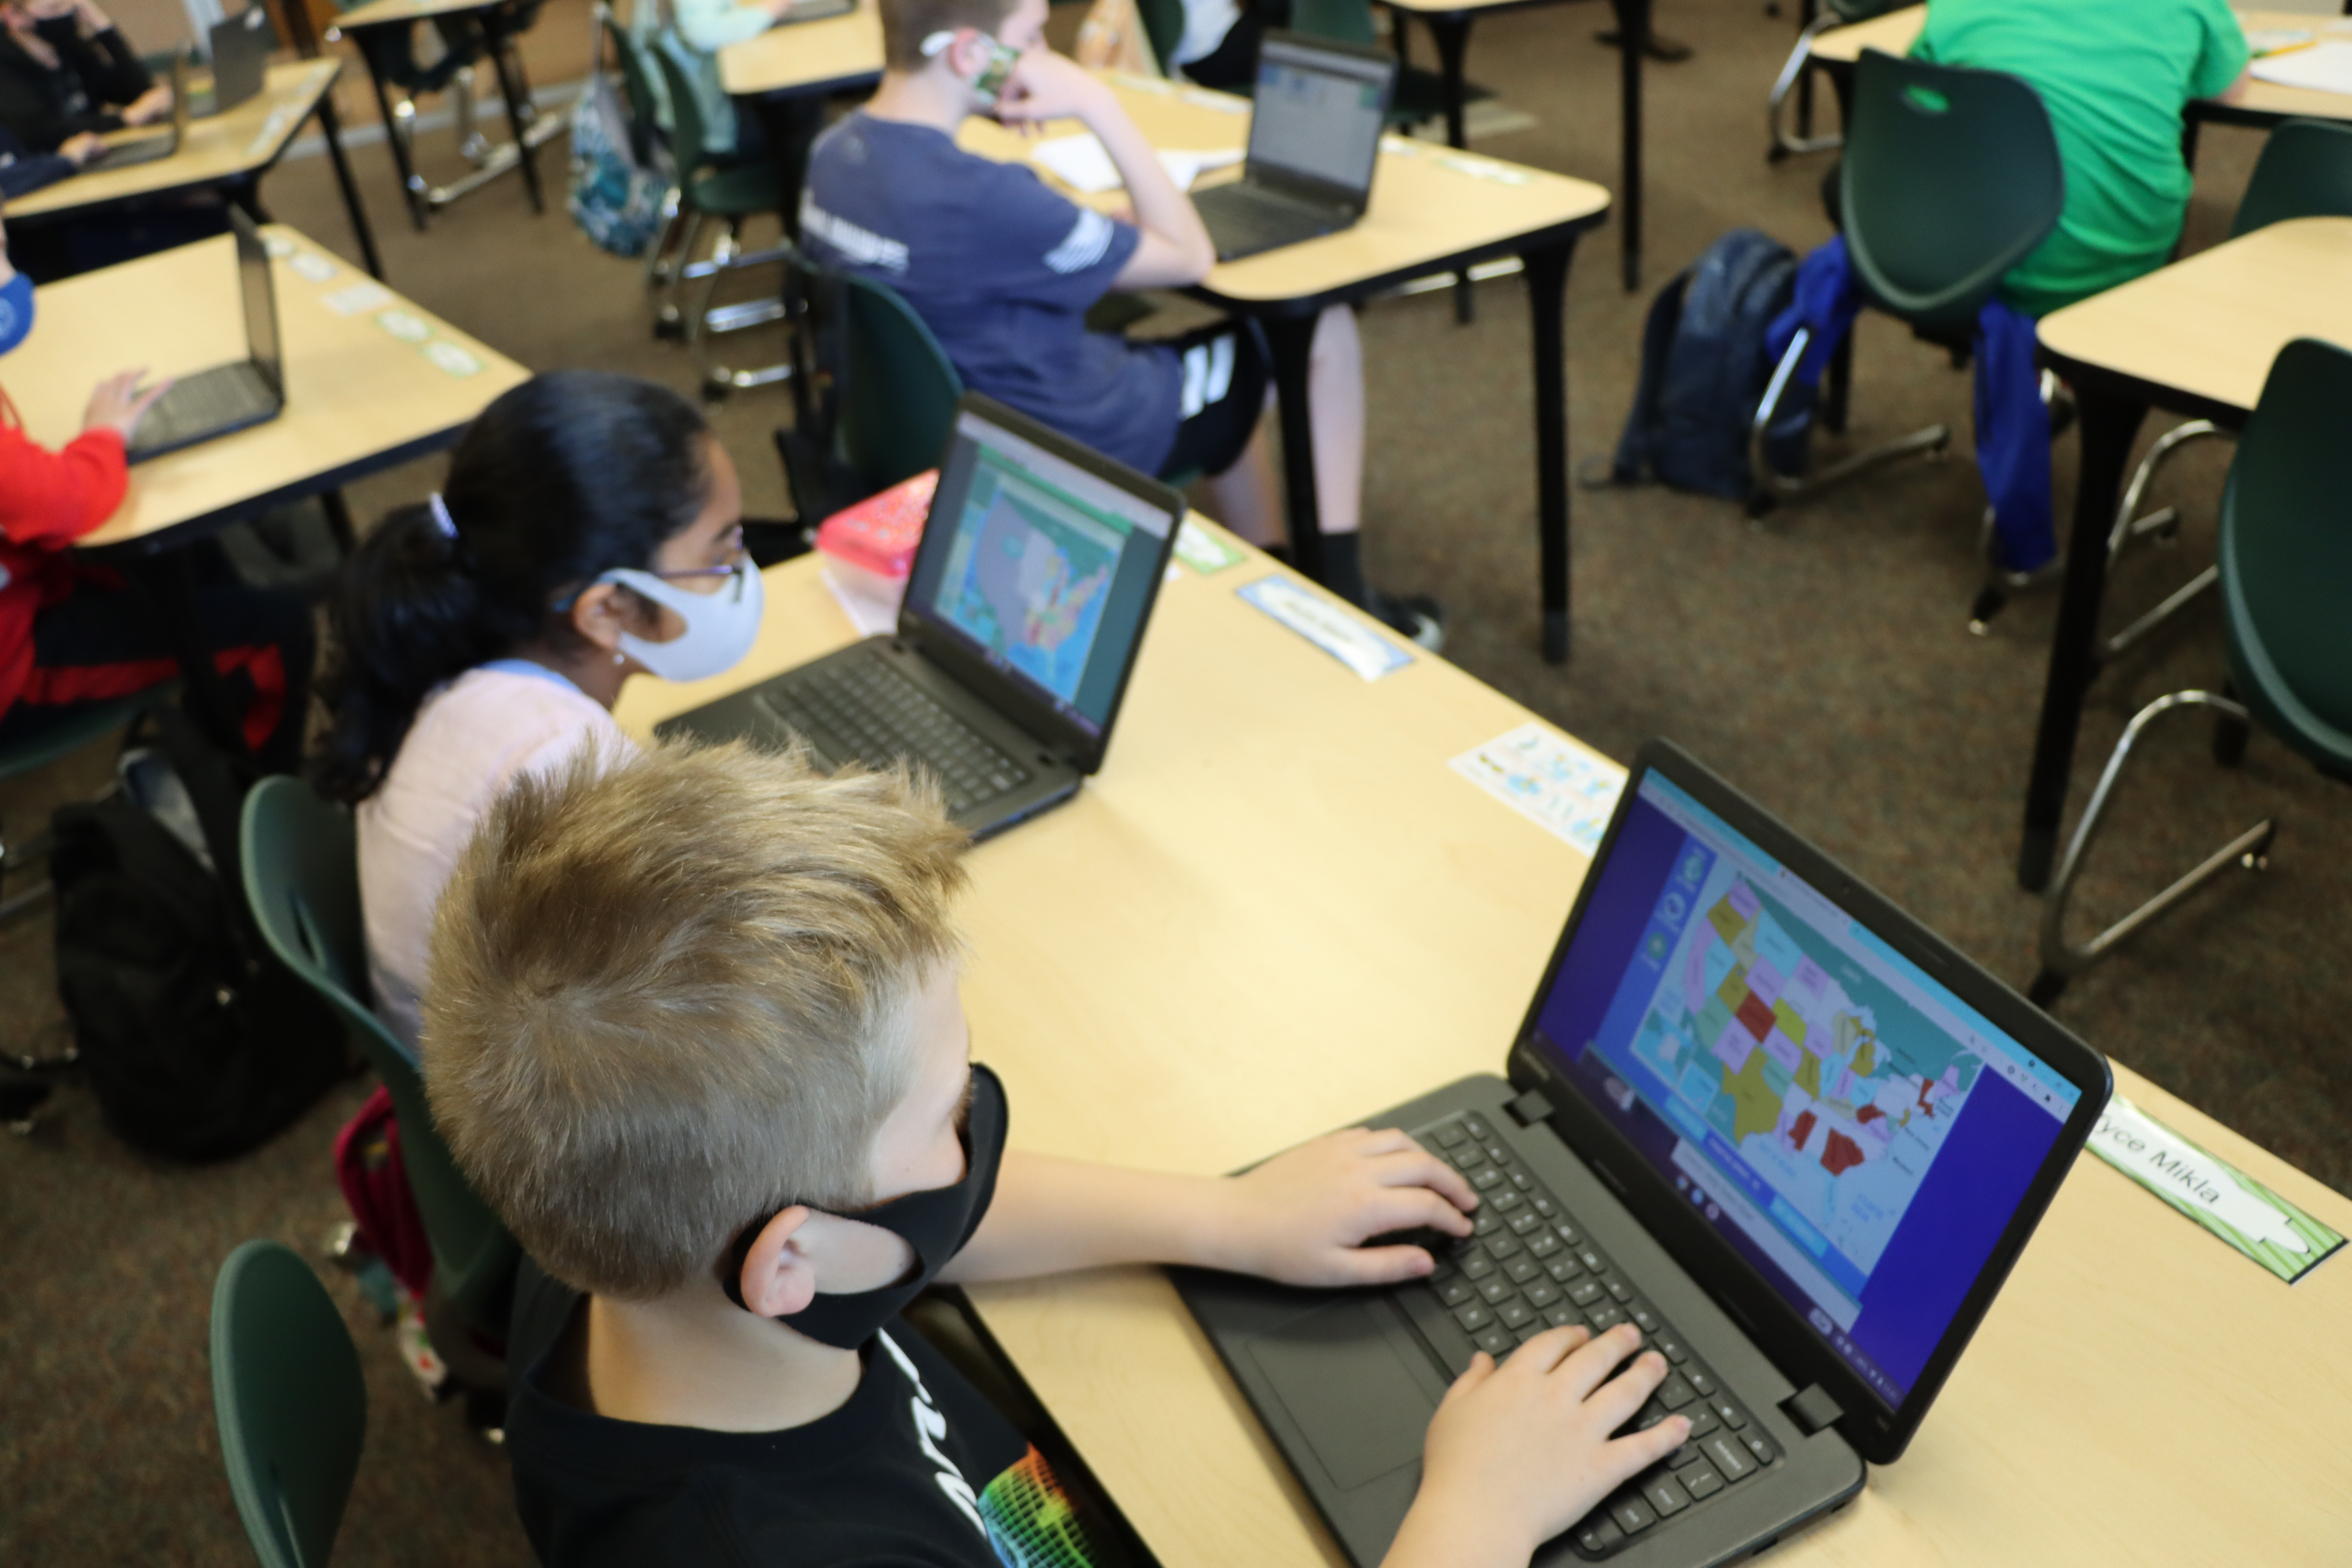 Students using Chromebooks in classroom